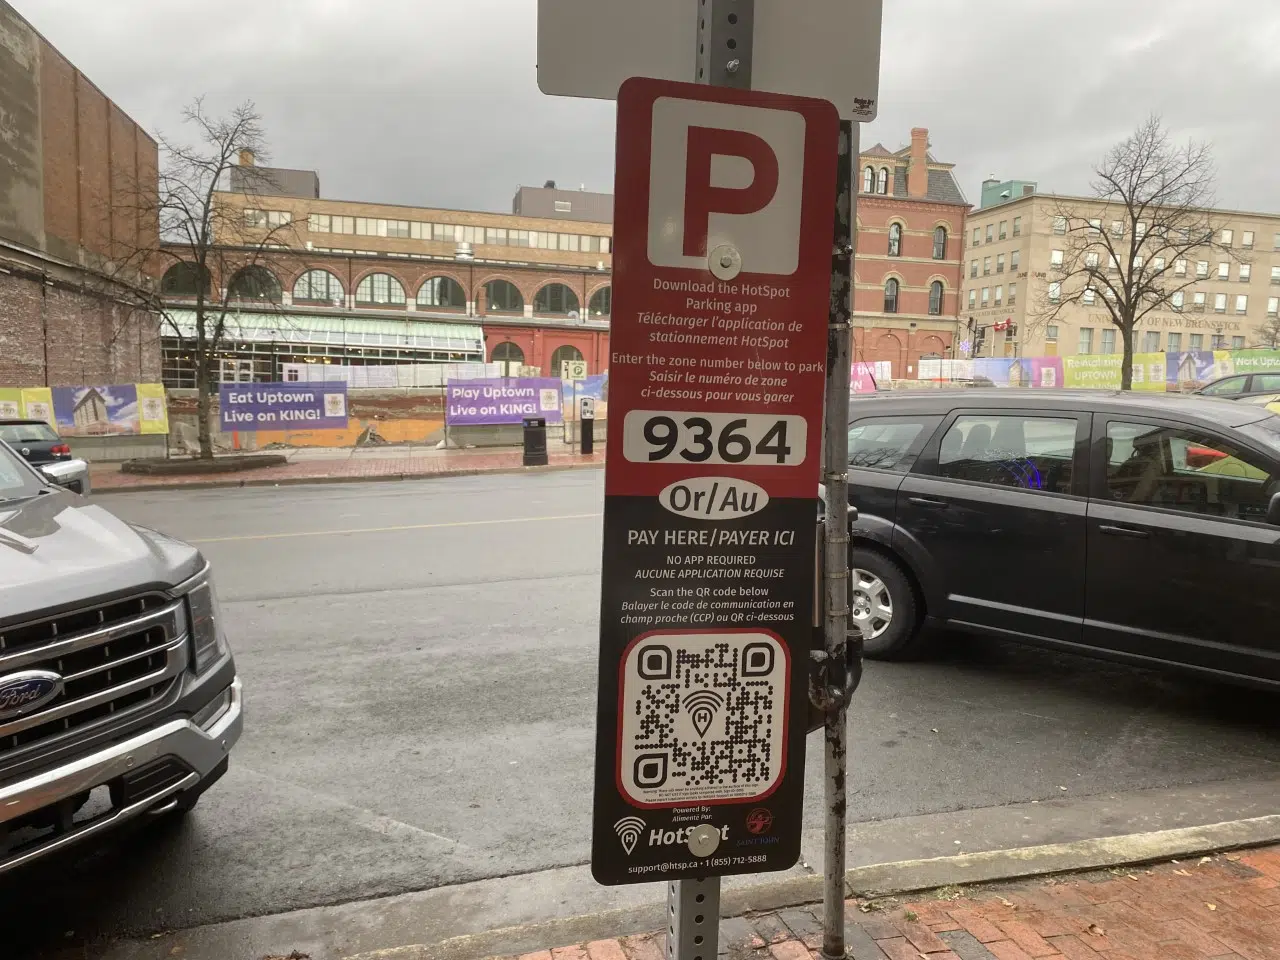 QR Code Parking Payment Options Expanded